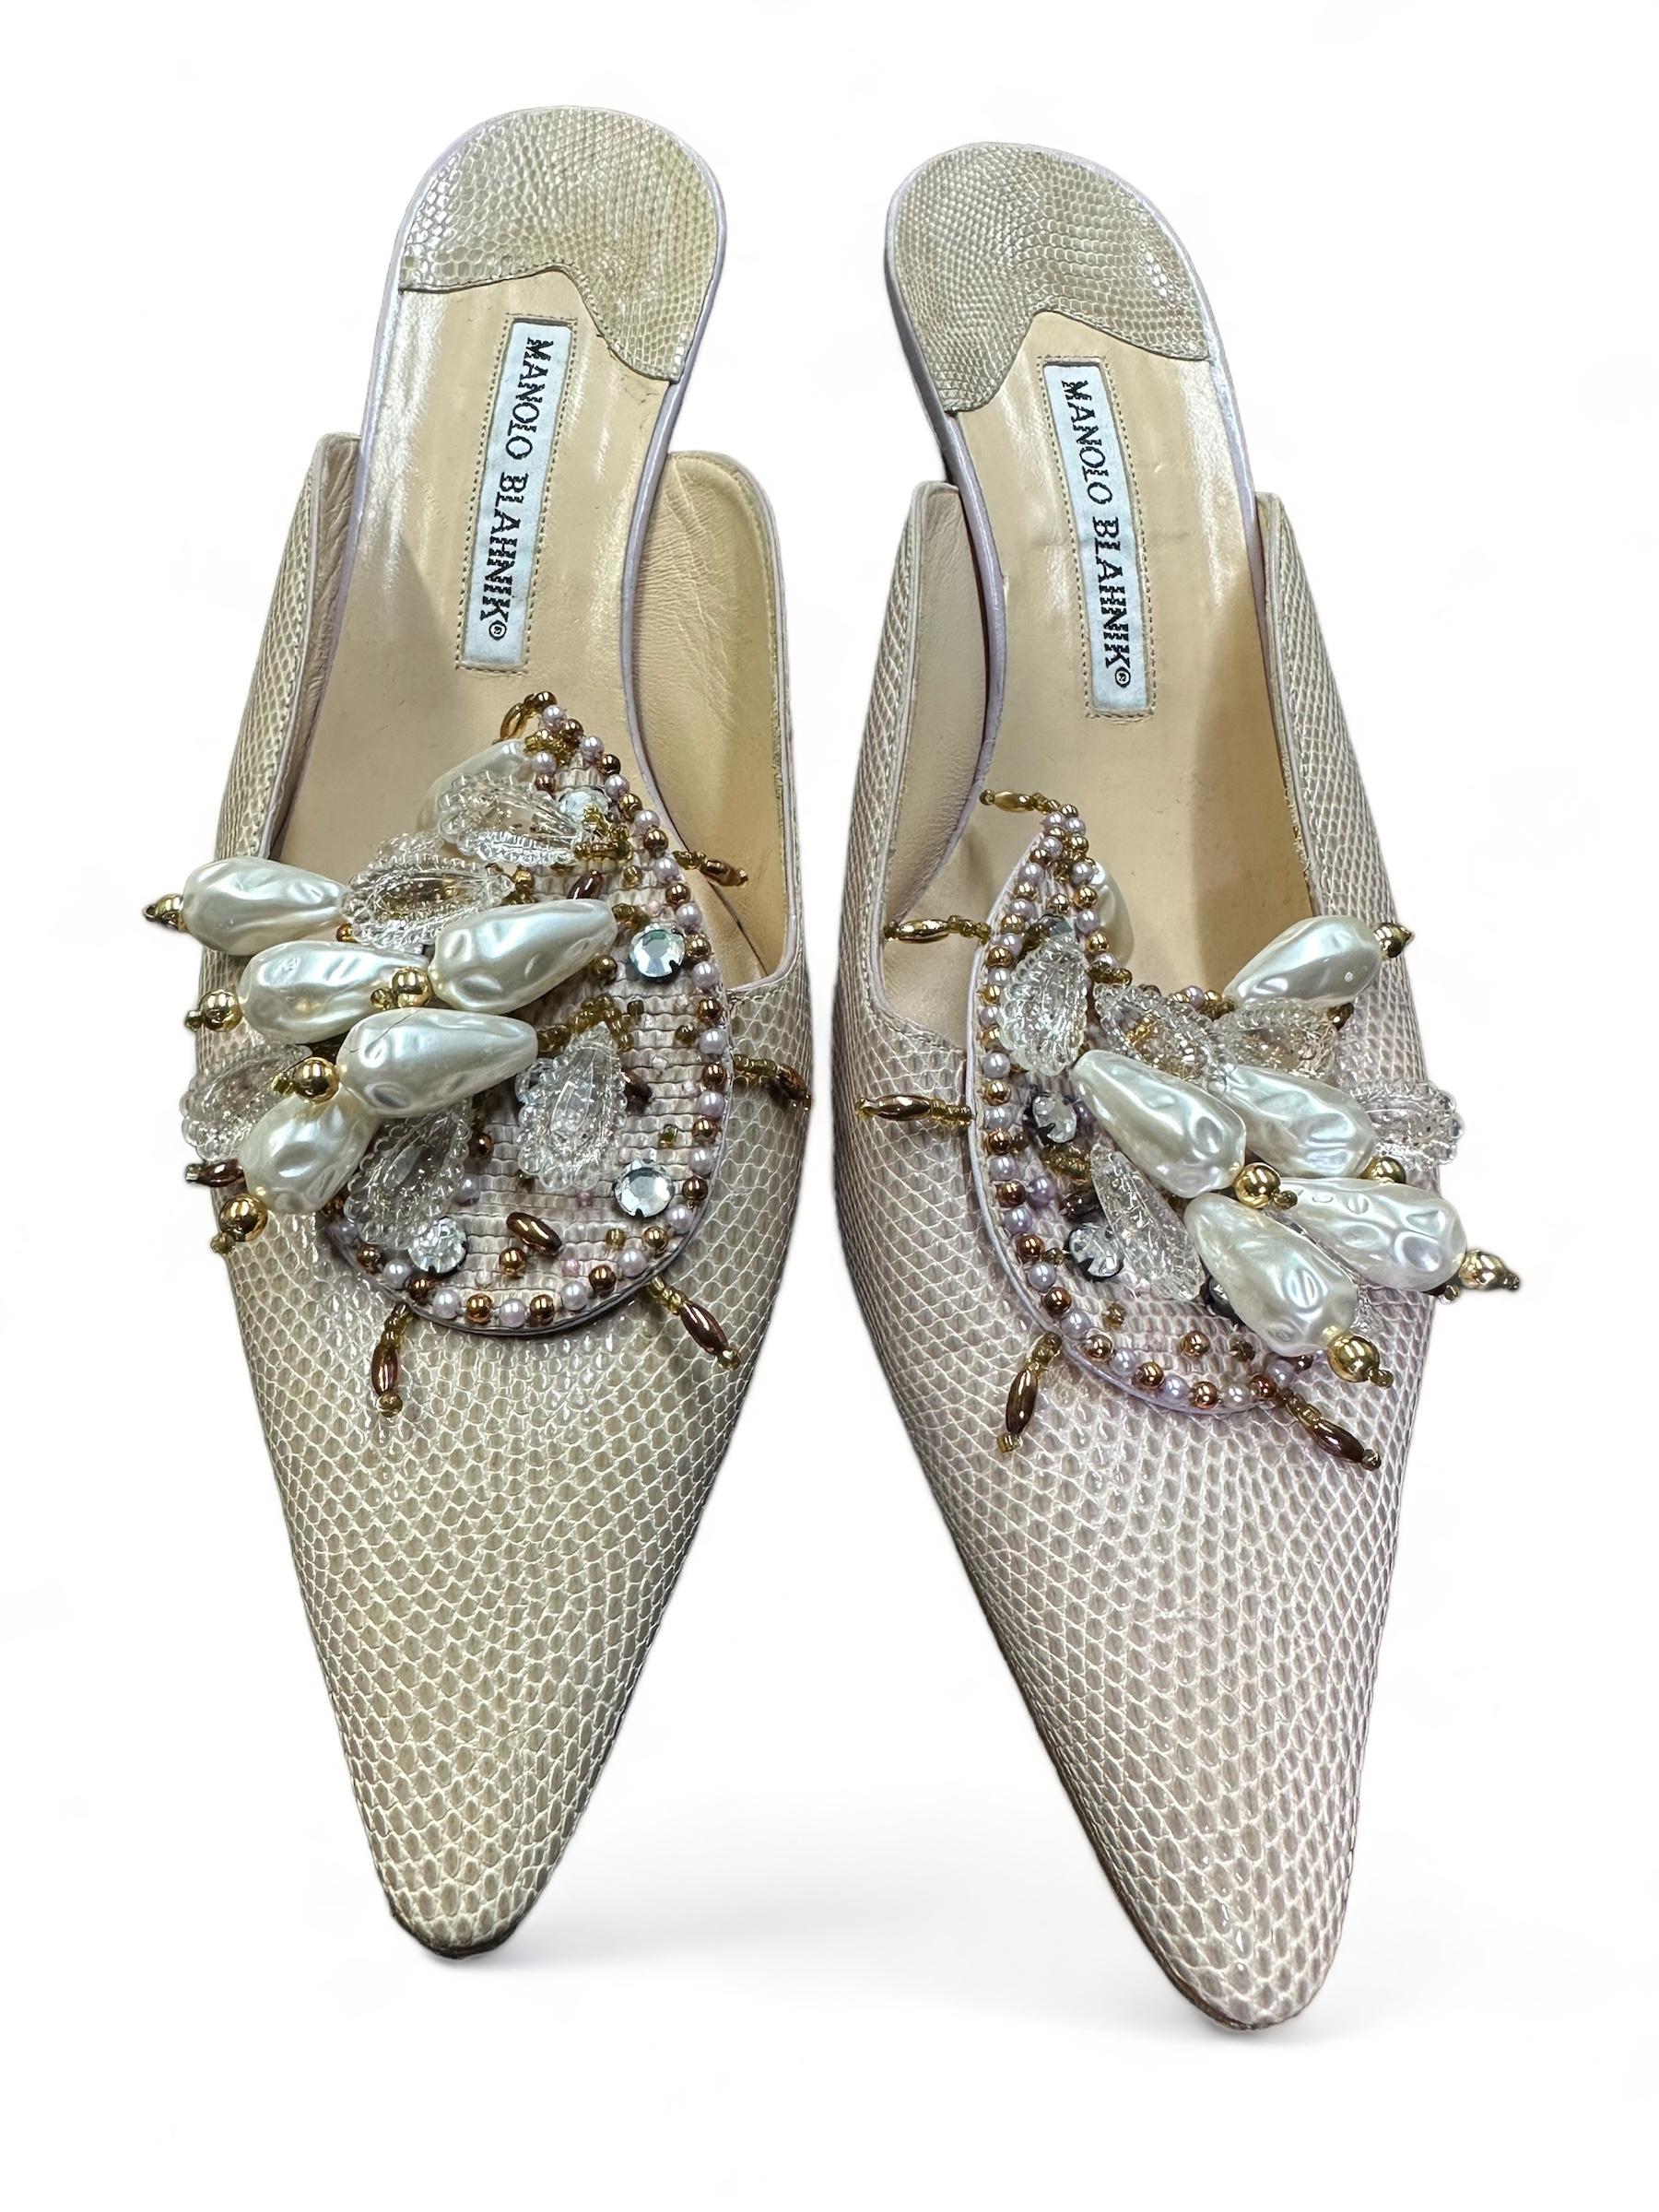 Vintage Manolo Blahnik Orientalia Lizard Embossed Mules Late 1990's size 40 1/2 In Excellent Condition For Sale In New York, NY